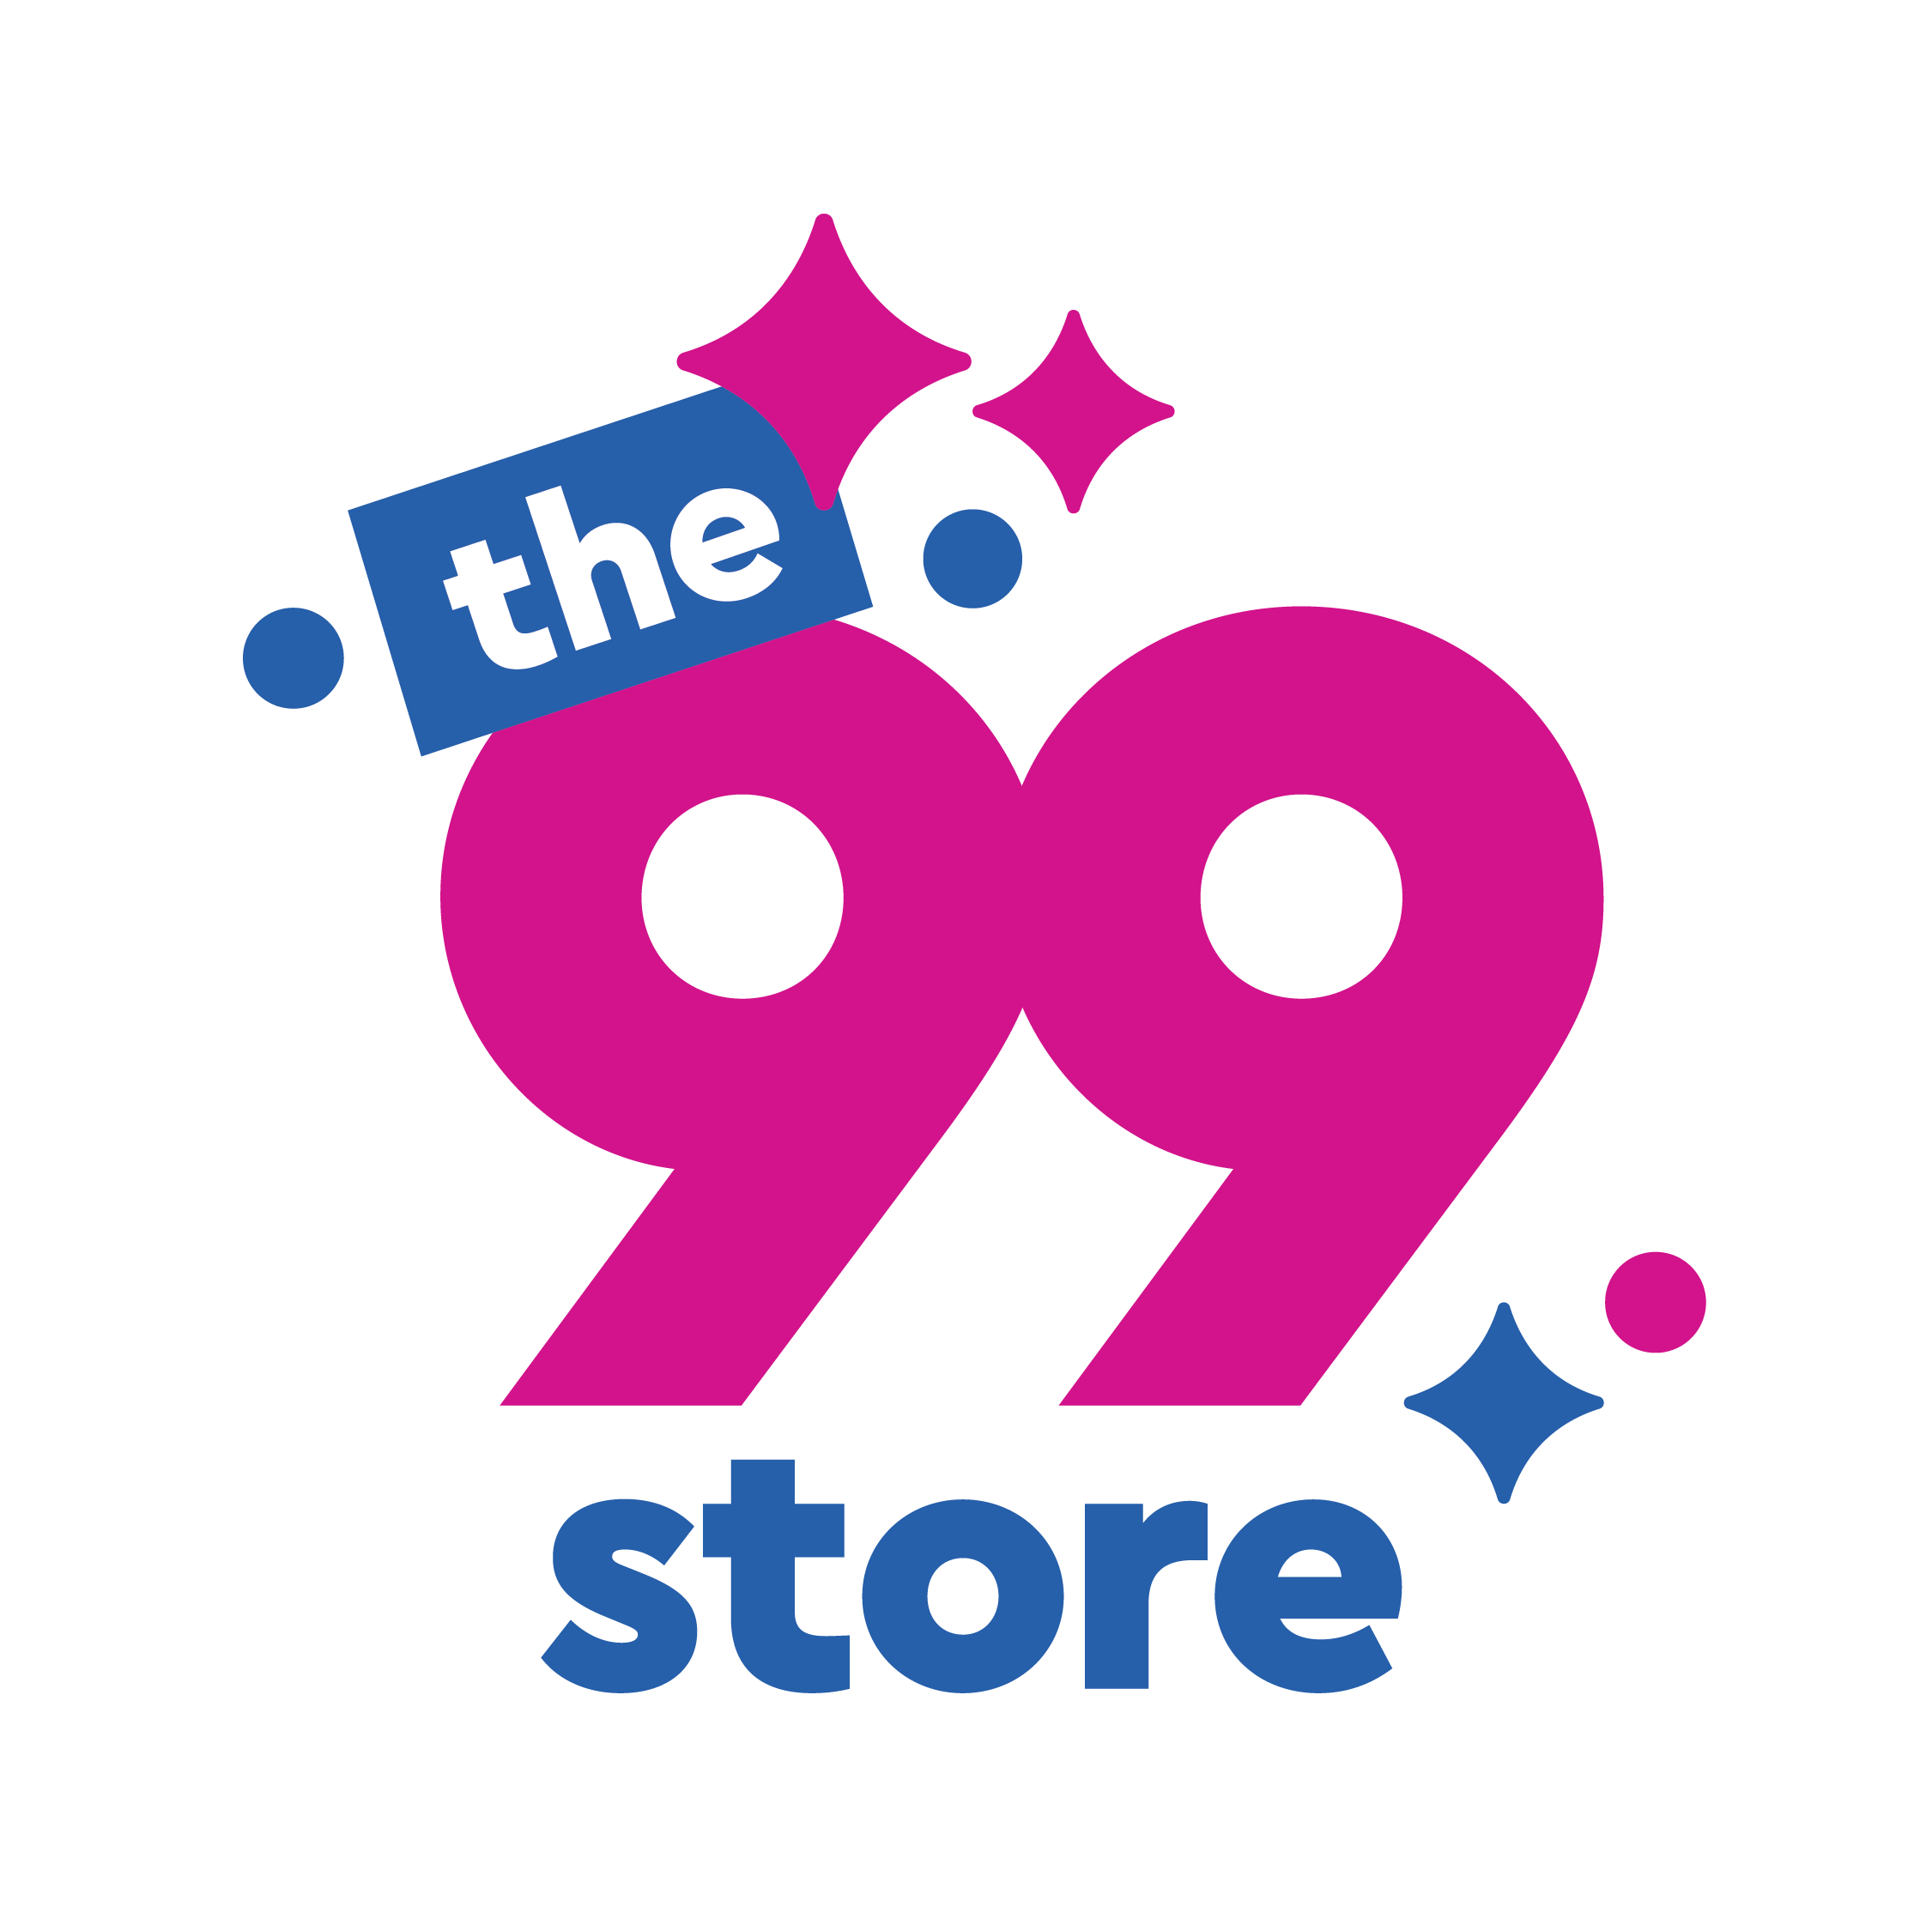 Welcome to 99 Cents Only Stores